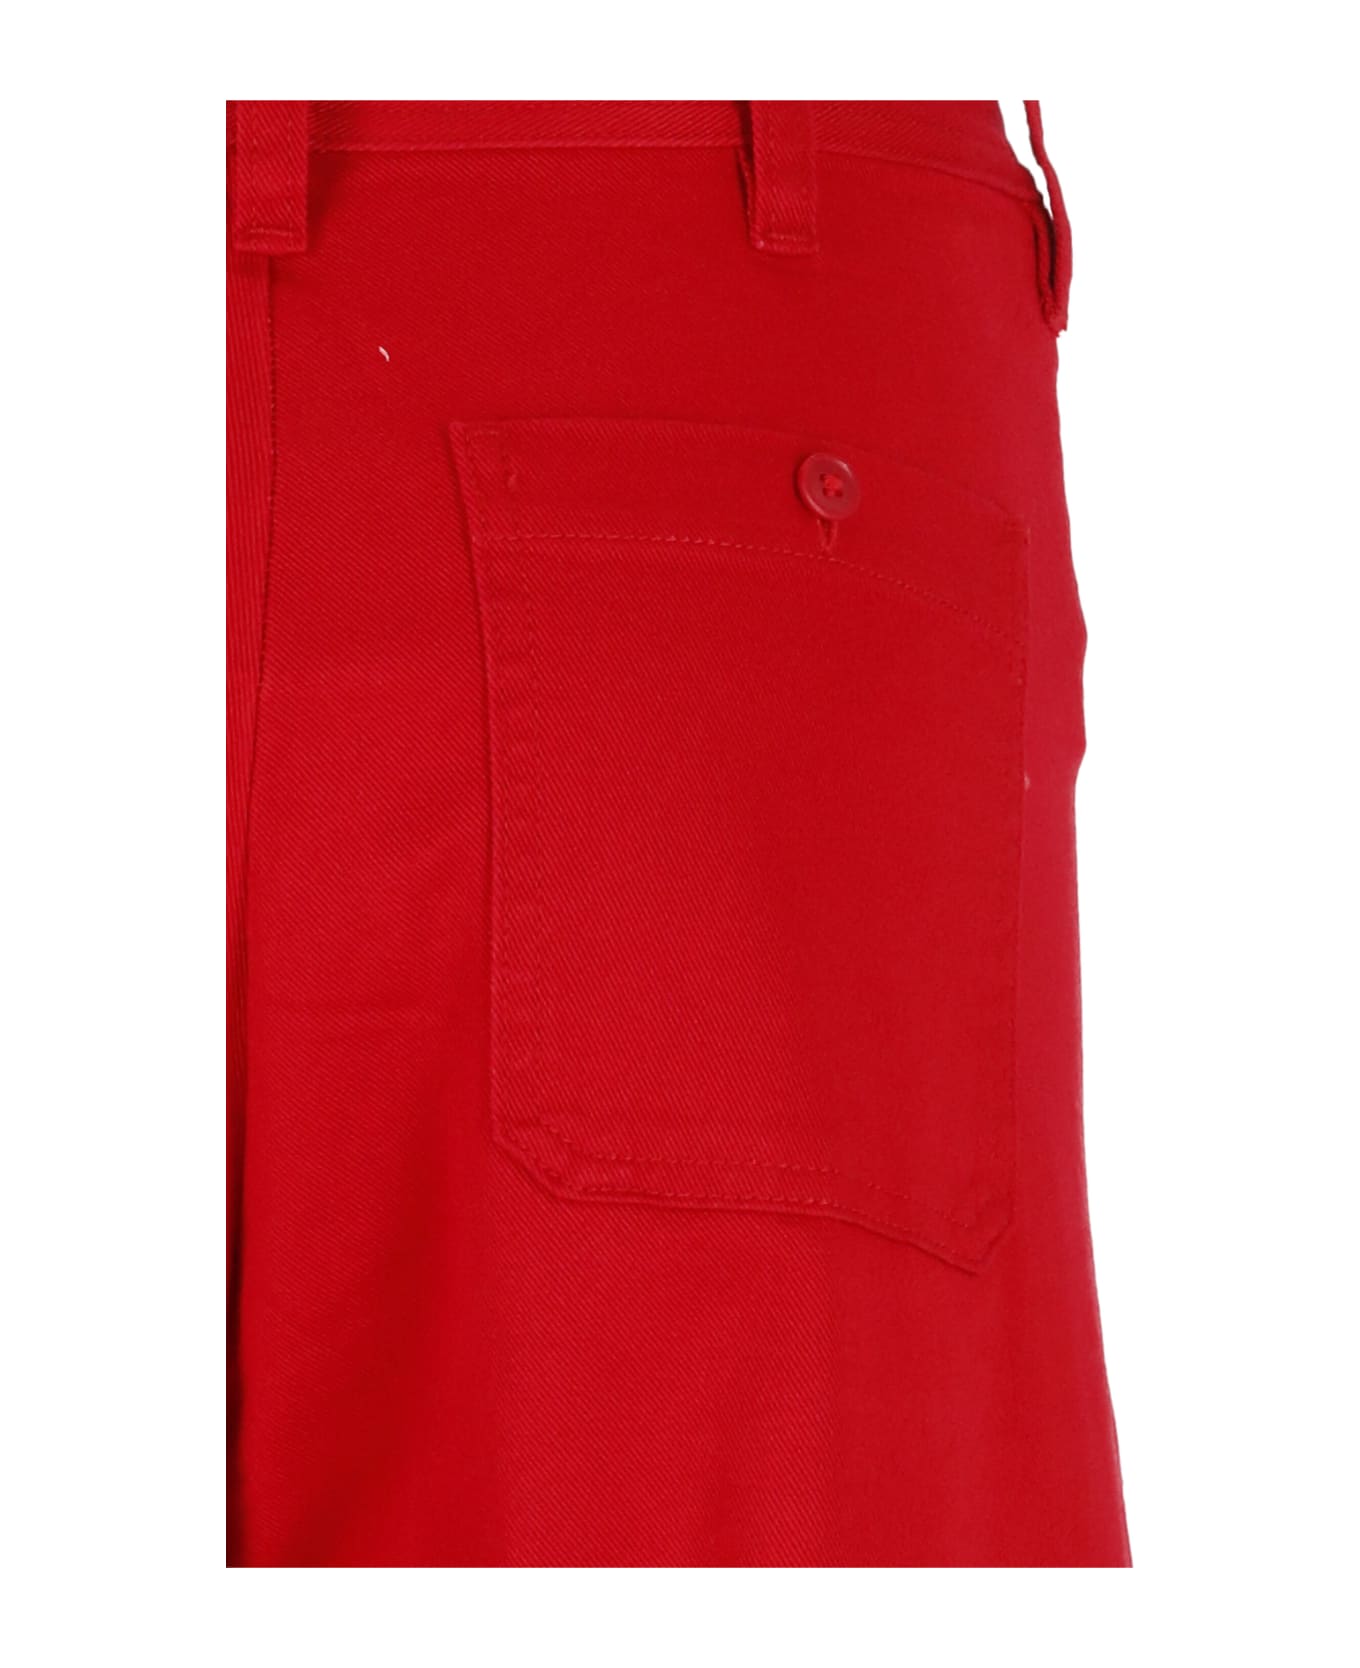 Ralph Lauren Cotton Palazzo Trousers - Red ボトムス